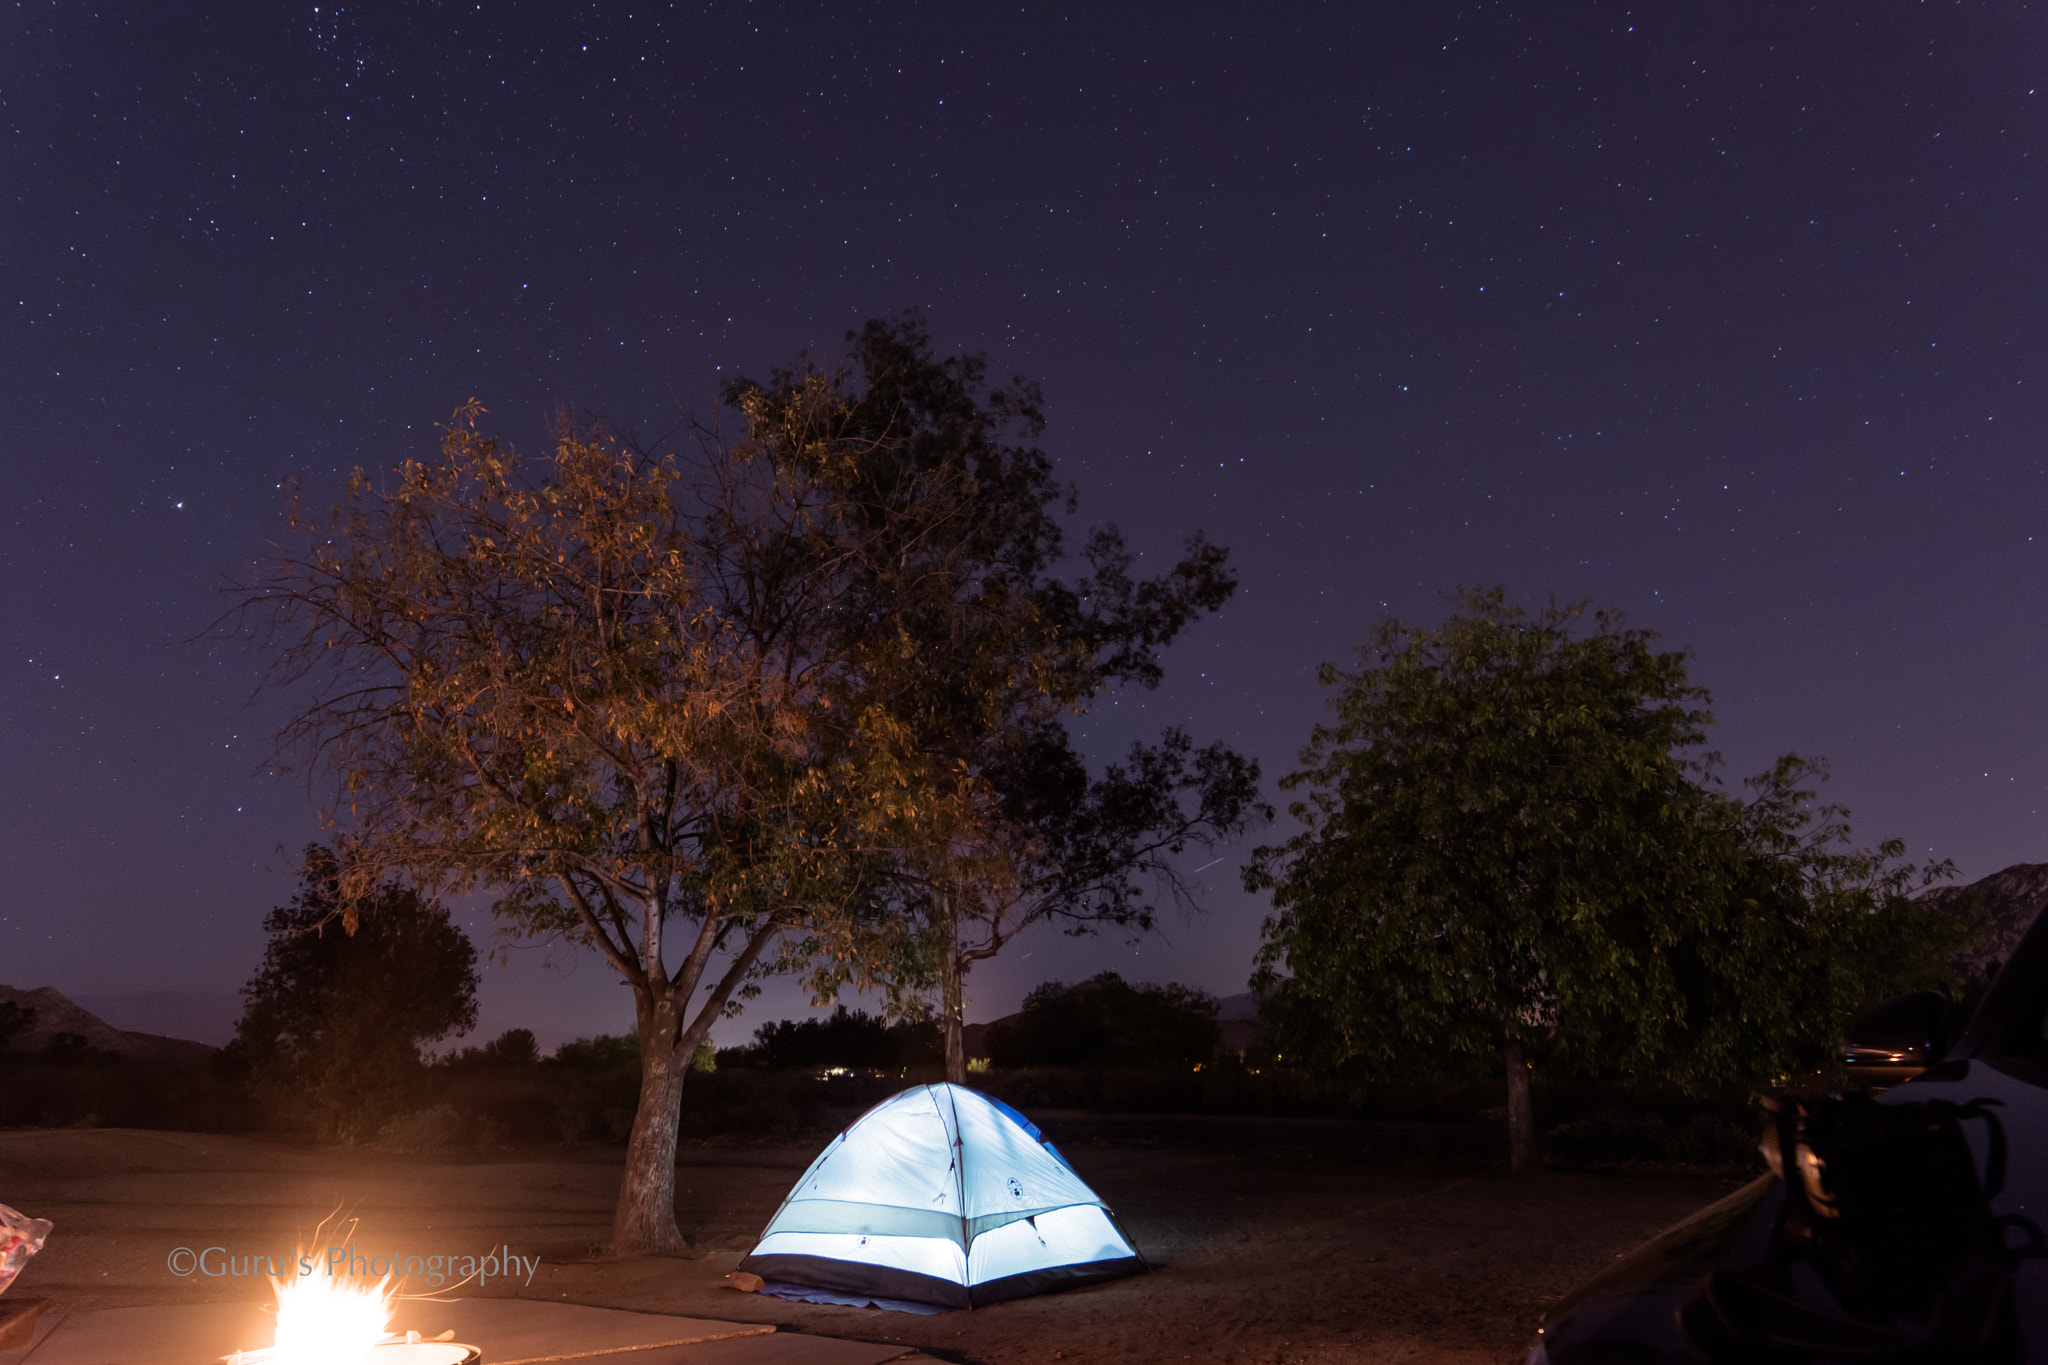 Nikon D7100 sample photo. Glowing tent under beautiful star filled sky photography